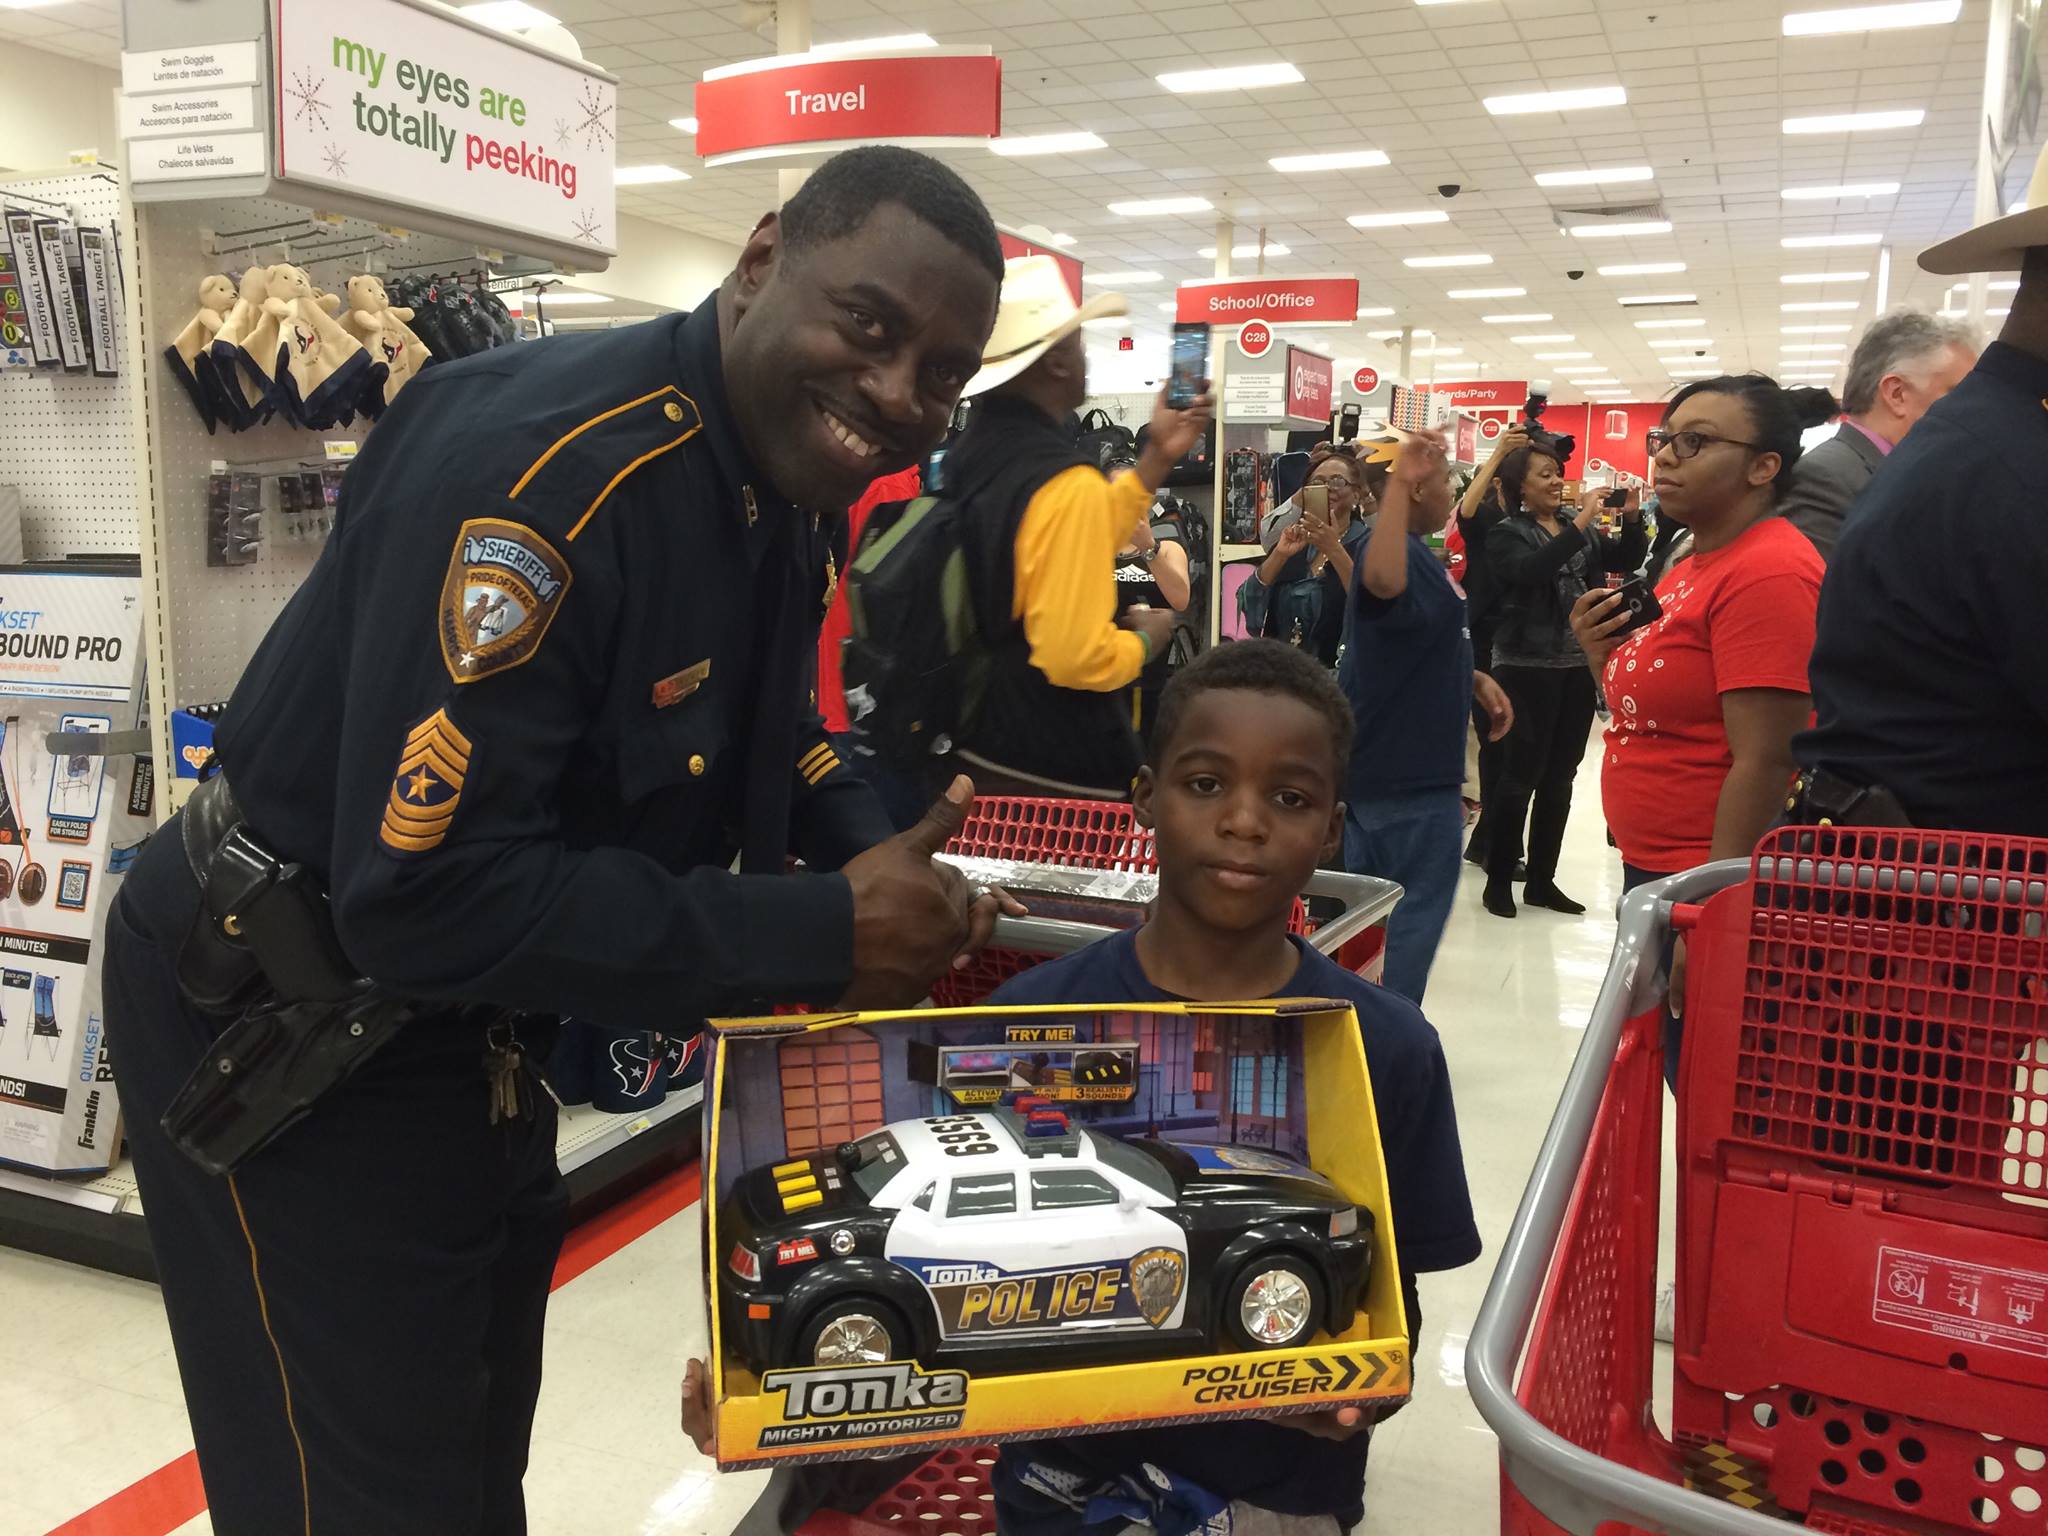 Harris County Sheriff’s Office PAL Team Launches Shop with a Cop Essay Contest